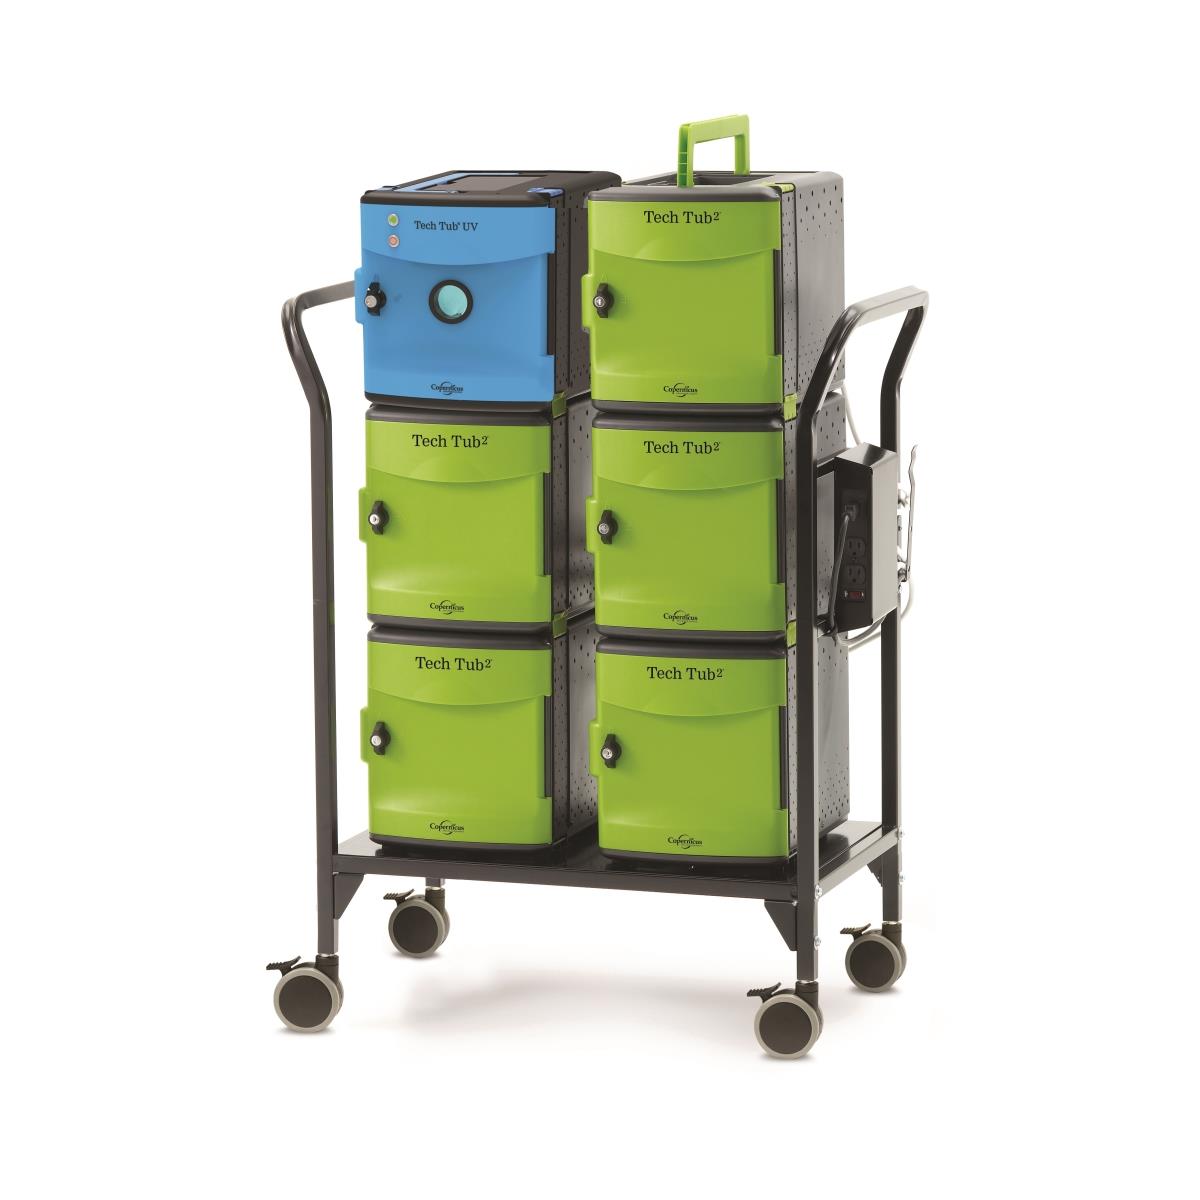 Picture of Copernicus FTT726-UV Tech Tub2 Modular Cart with UV Tub - Charges 26 Devices